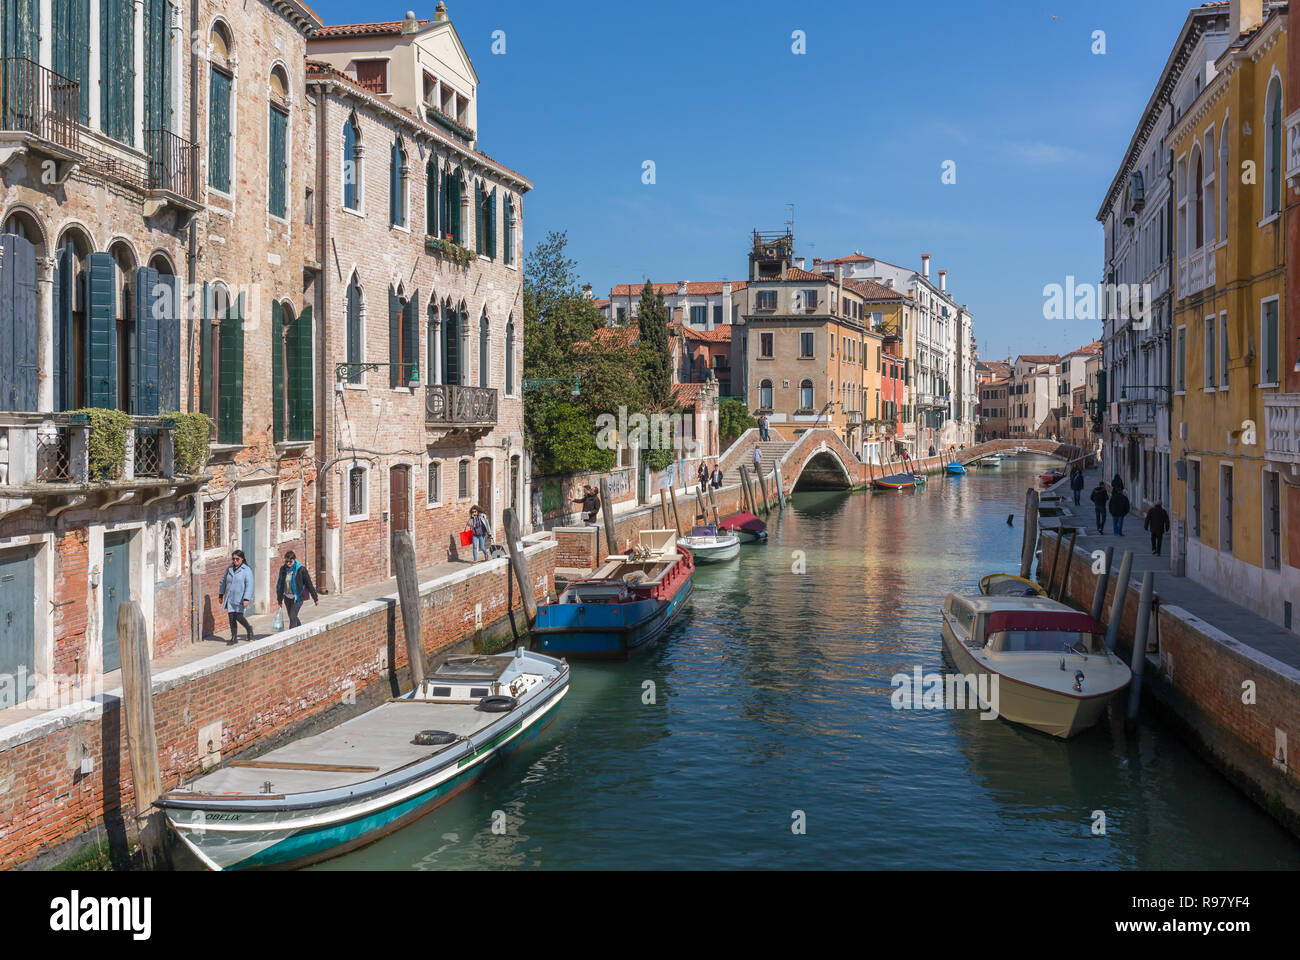 Venice, Italy - March 23, 2018: Day view of the side canal in Venice, Italy Stock Photo